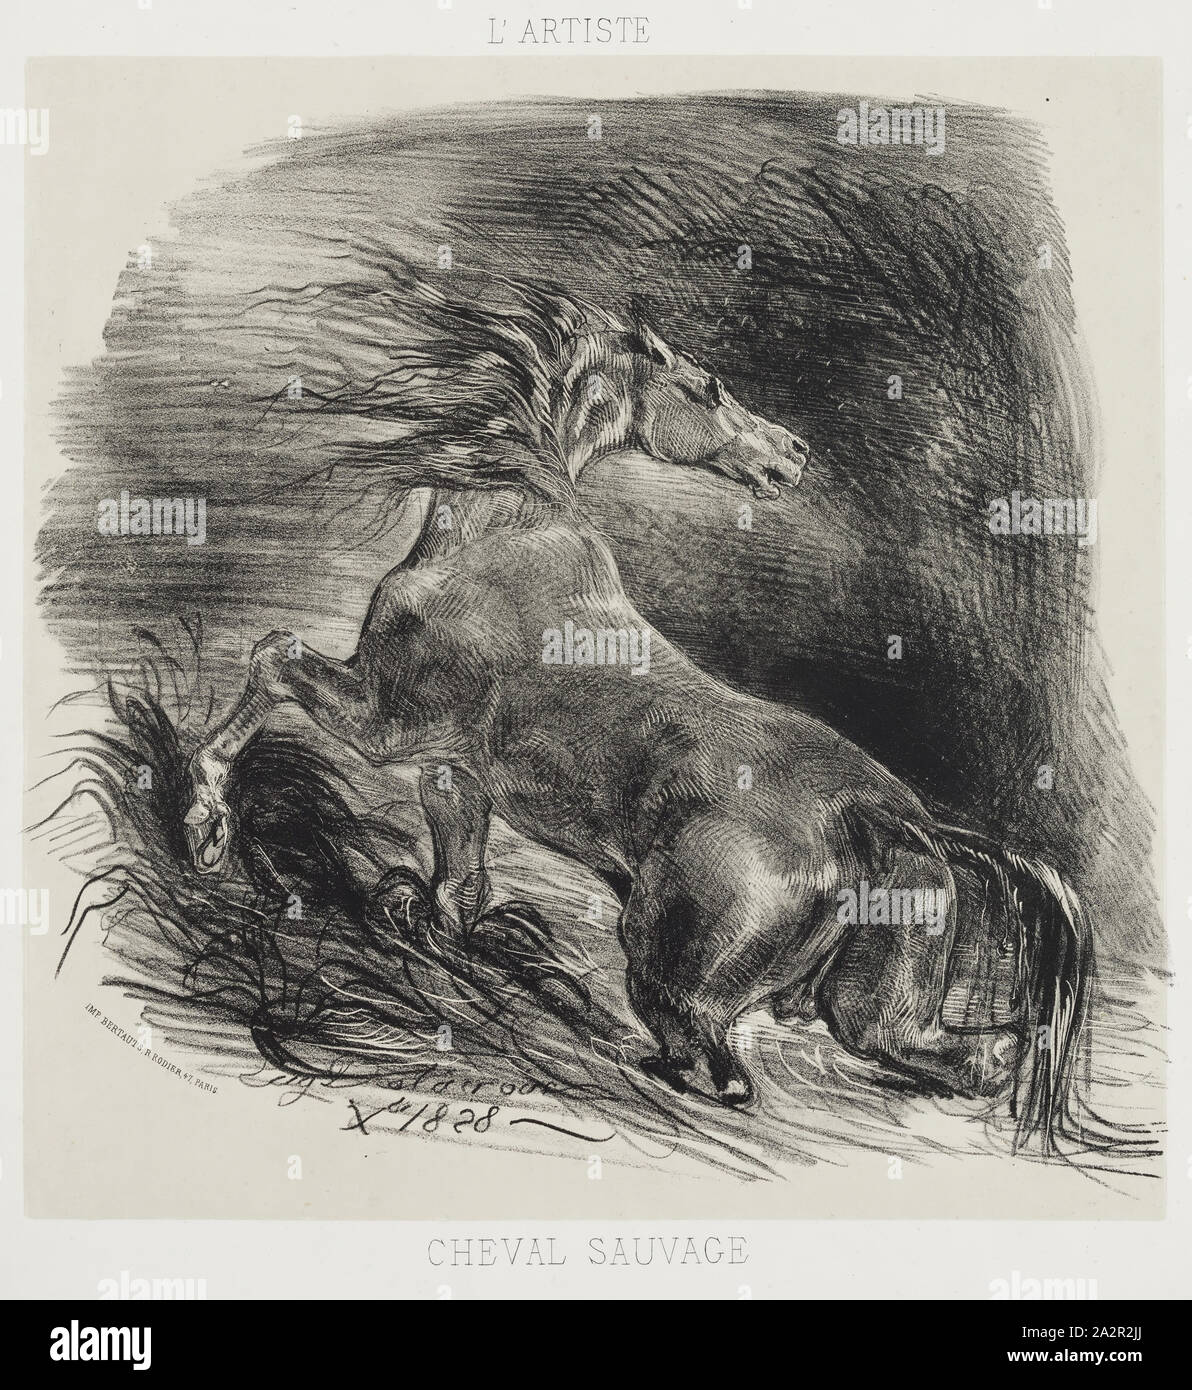 Eugène Delacroix, French, 1798-1863, Cheval sauvage, 1828, lithograph printed in color on wove paper, Image: 9 1/2 × 9 3/8 inches (24.1 × 23.8 cm Stock Photo